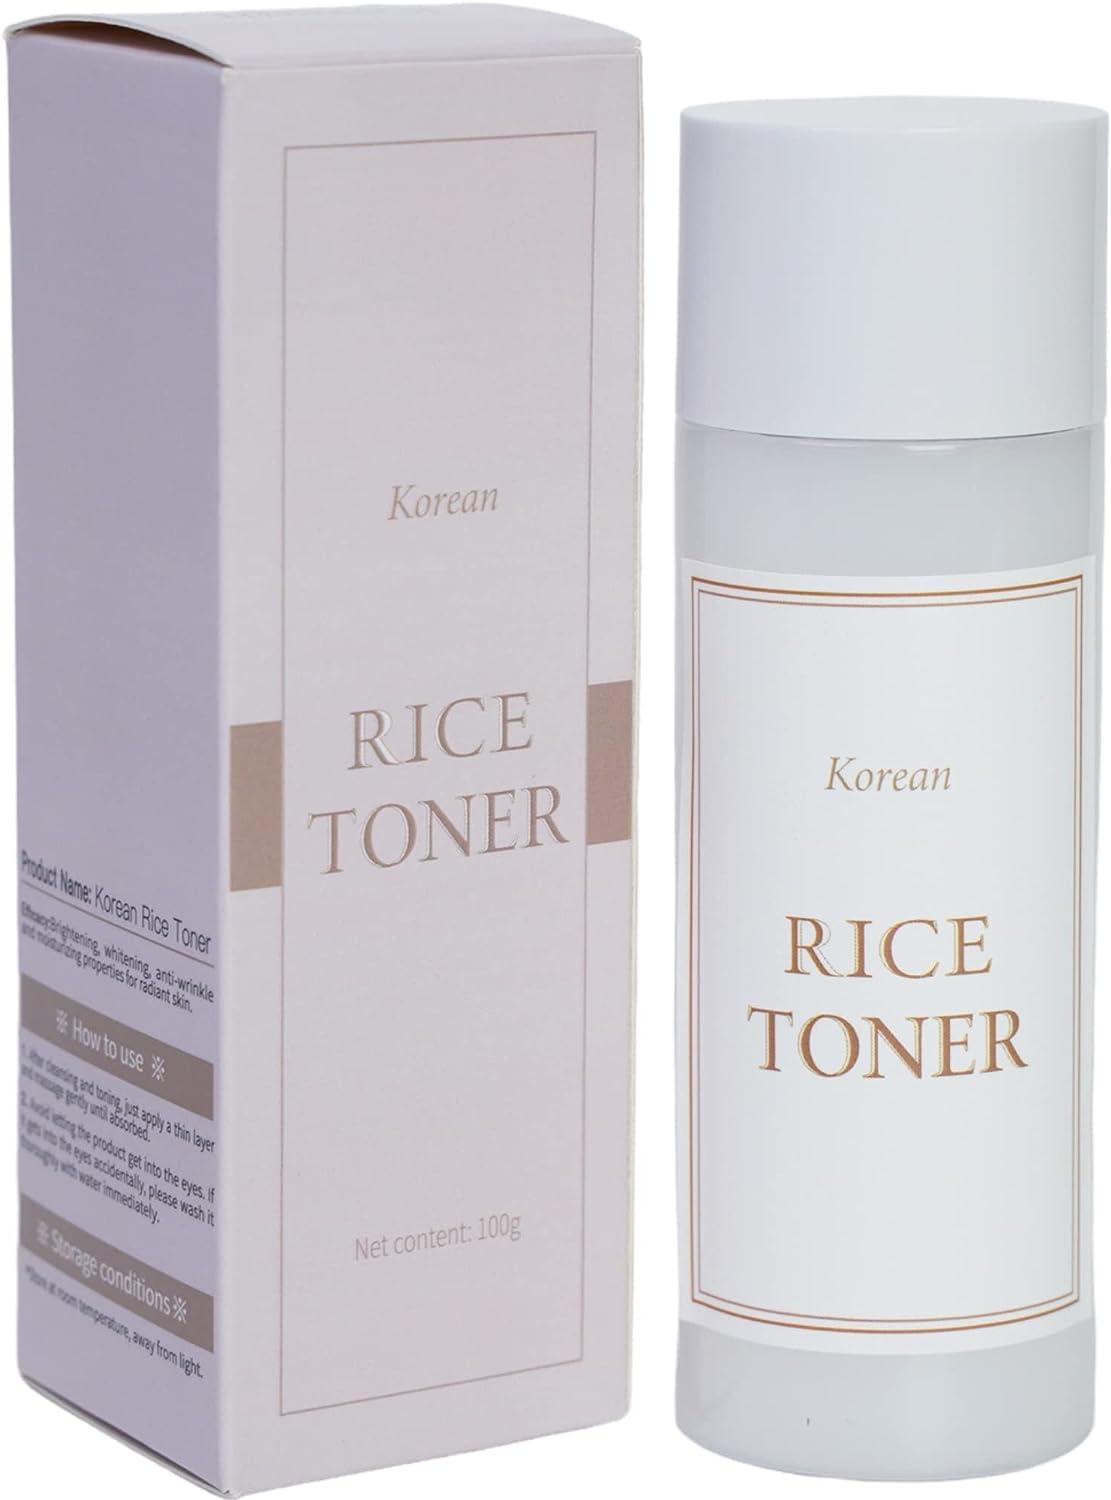  Rice Toner, 77.78% Rice Extract from Korea, Glow Essence with  Niacinamide, Hydrating for Dry Skin, K Beauty Toner, for All Skin Types,  Vegan, Alcohol Free, Fragrance Free, 3.52 Fl Oz (